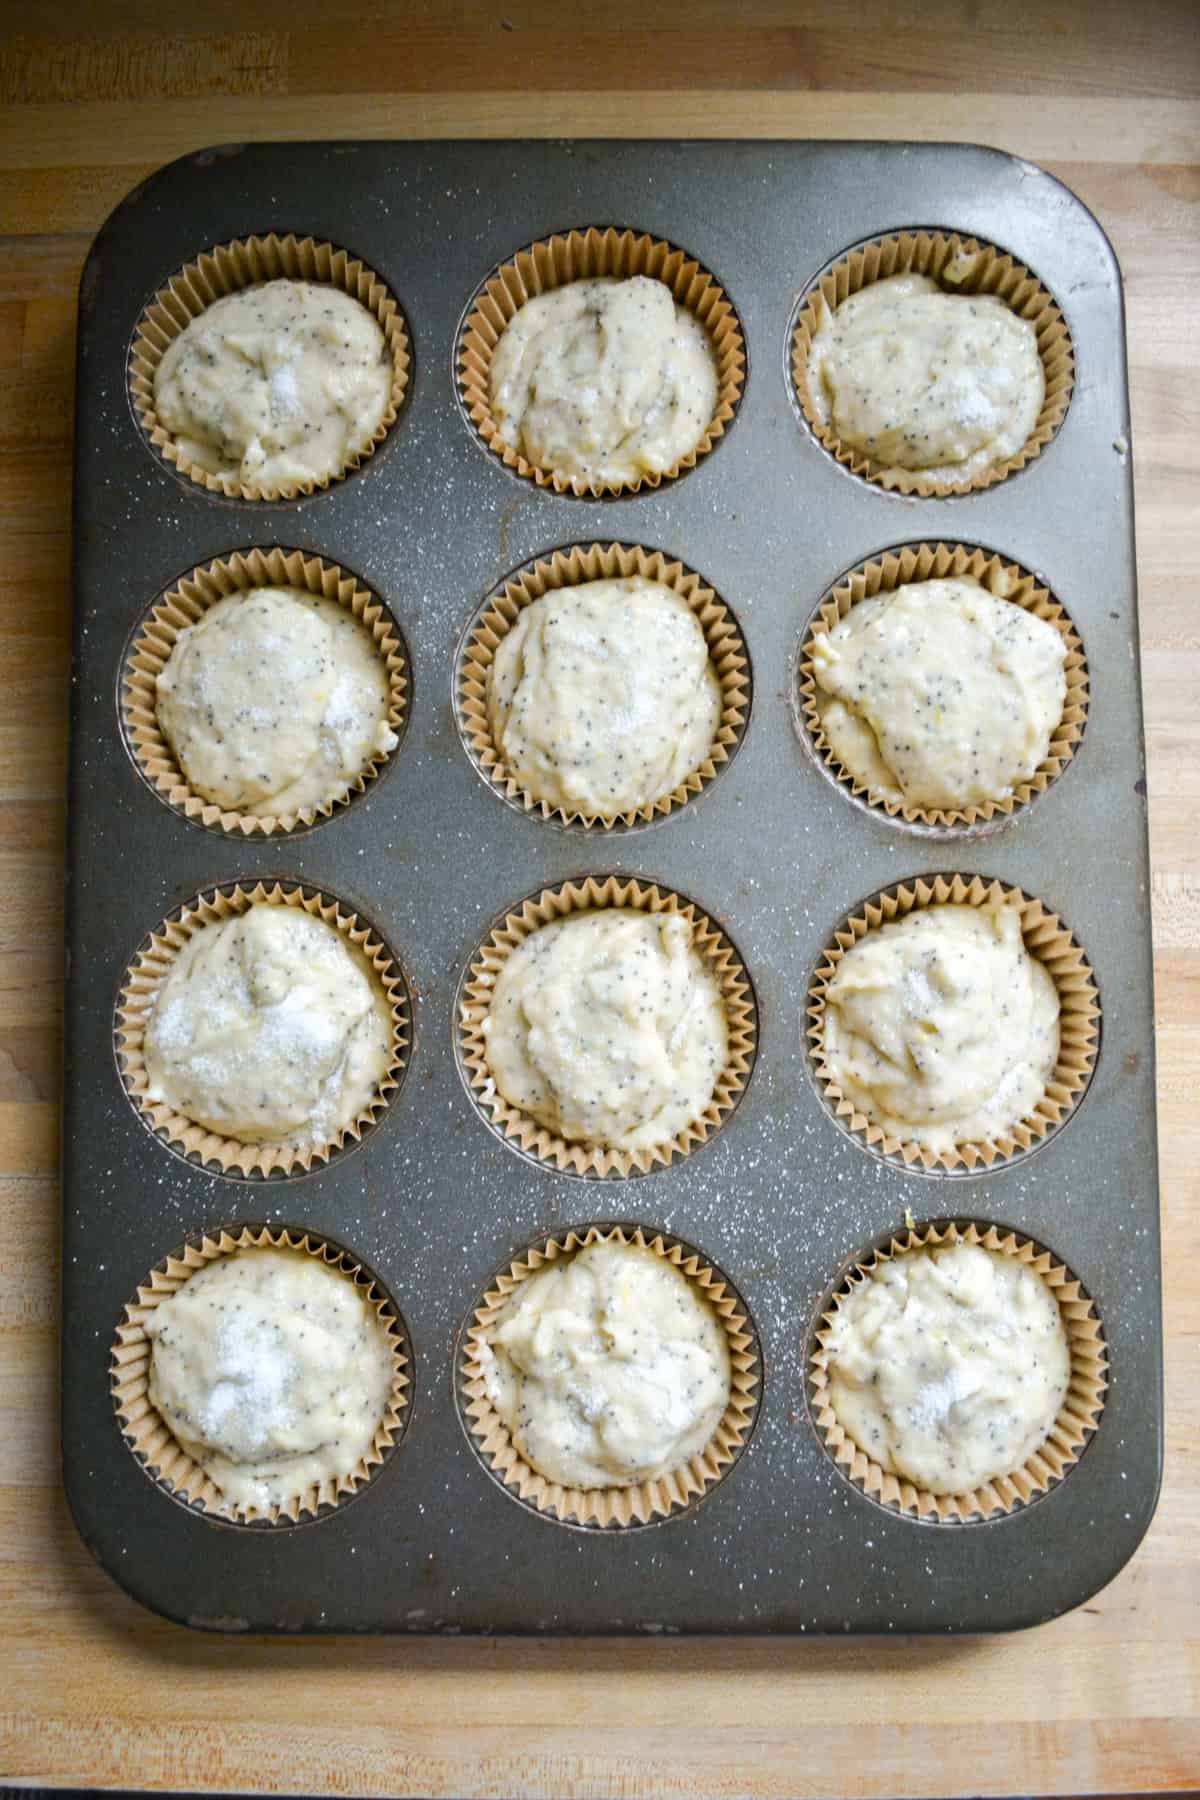 Batter portioned into lined muffin tins and topped with granulated sugar ready to bake.